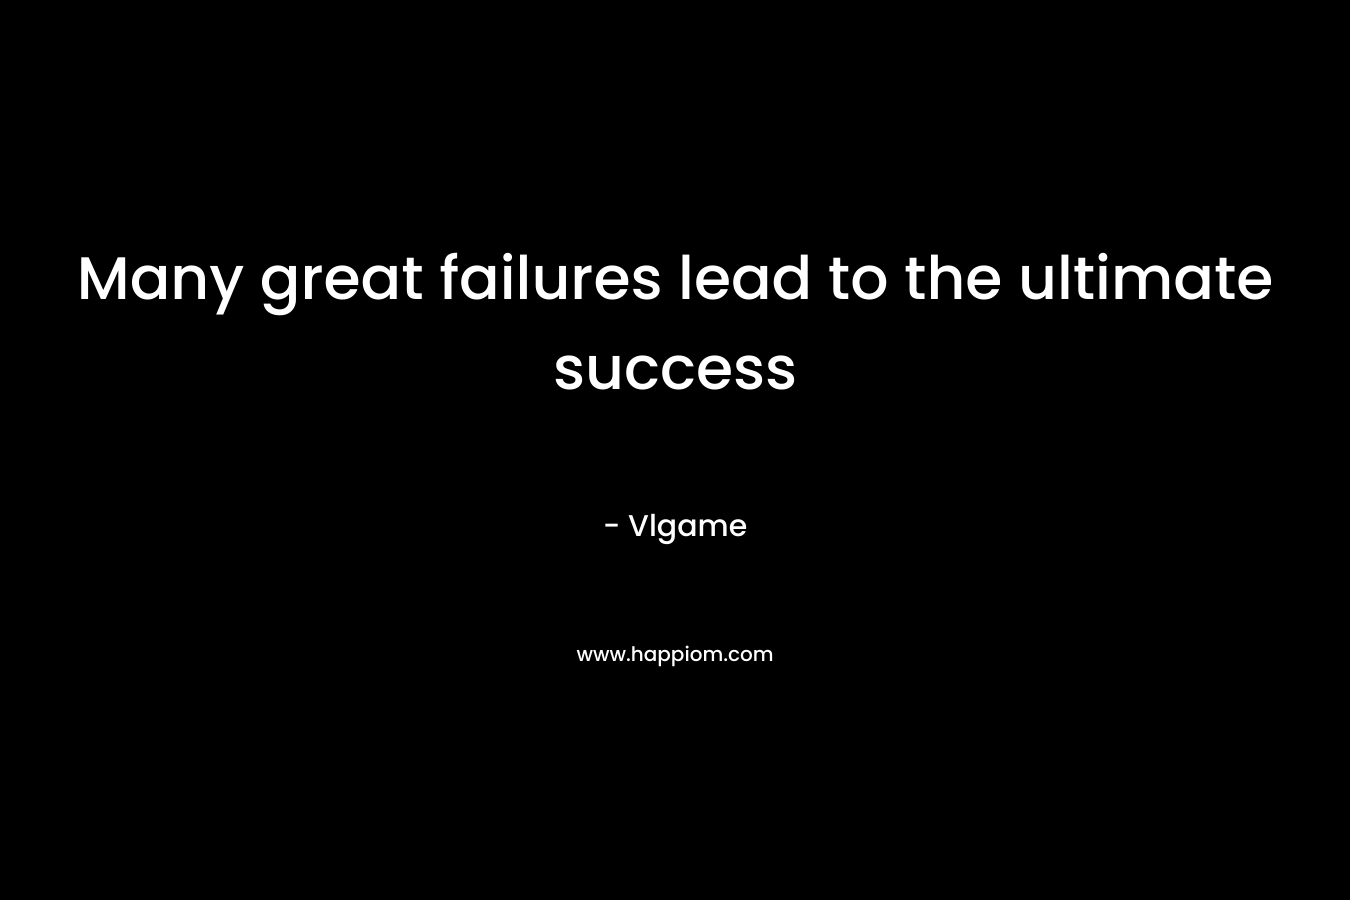 Many great failures lead to the ultimate success